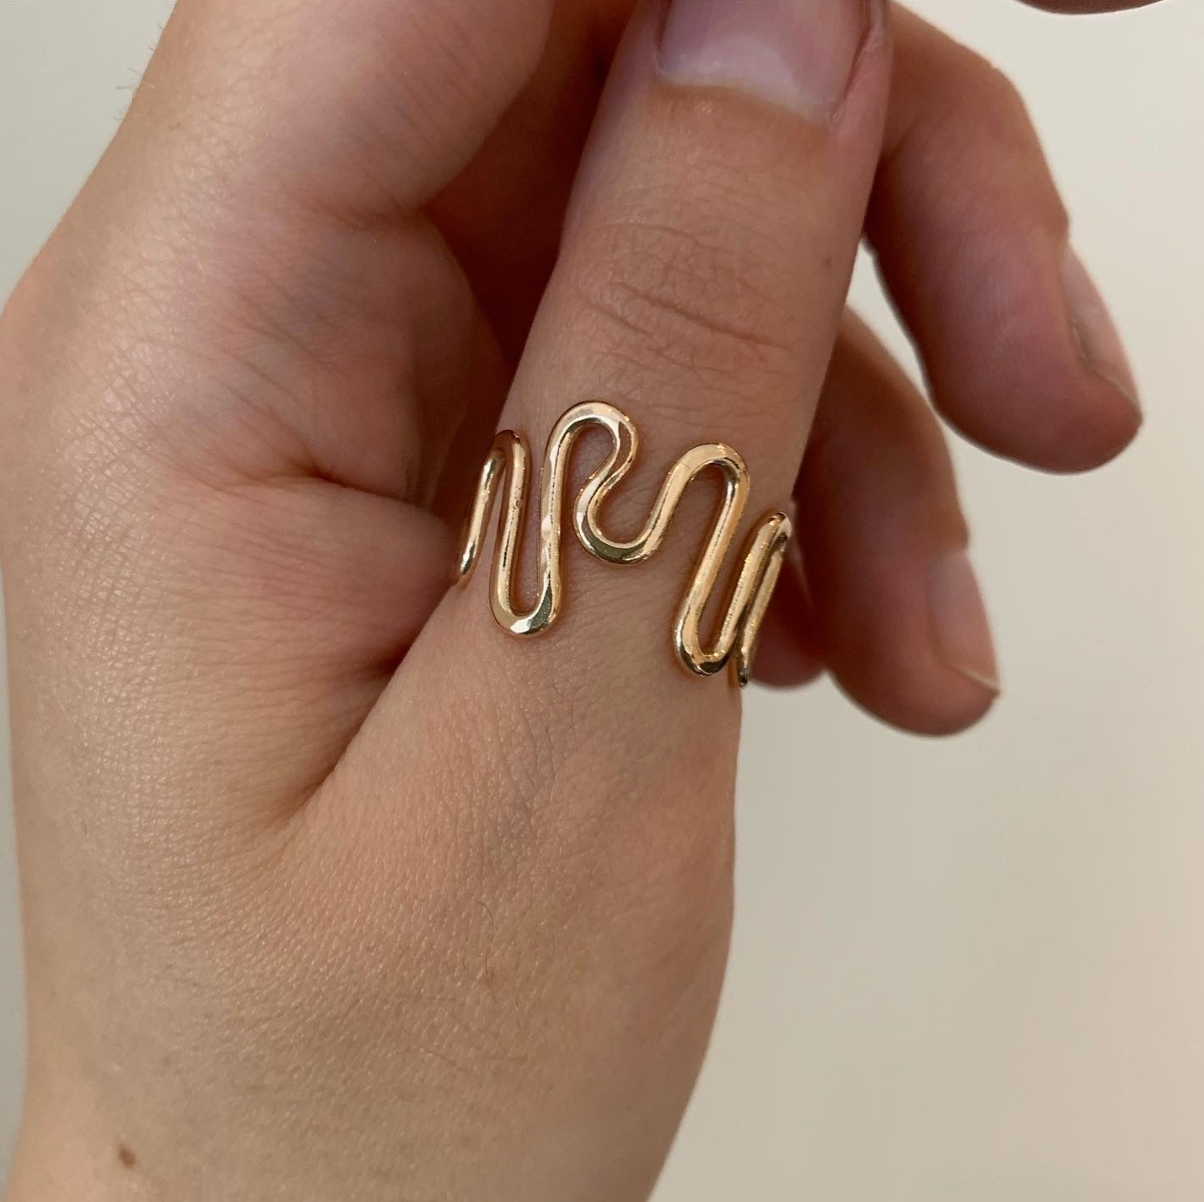 A gold-filled ripple ring on a hand.